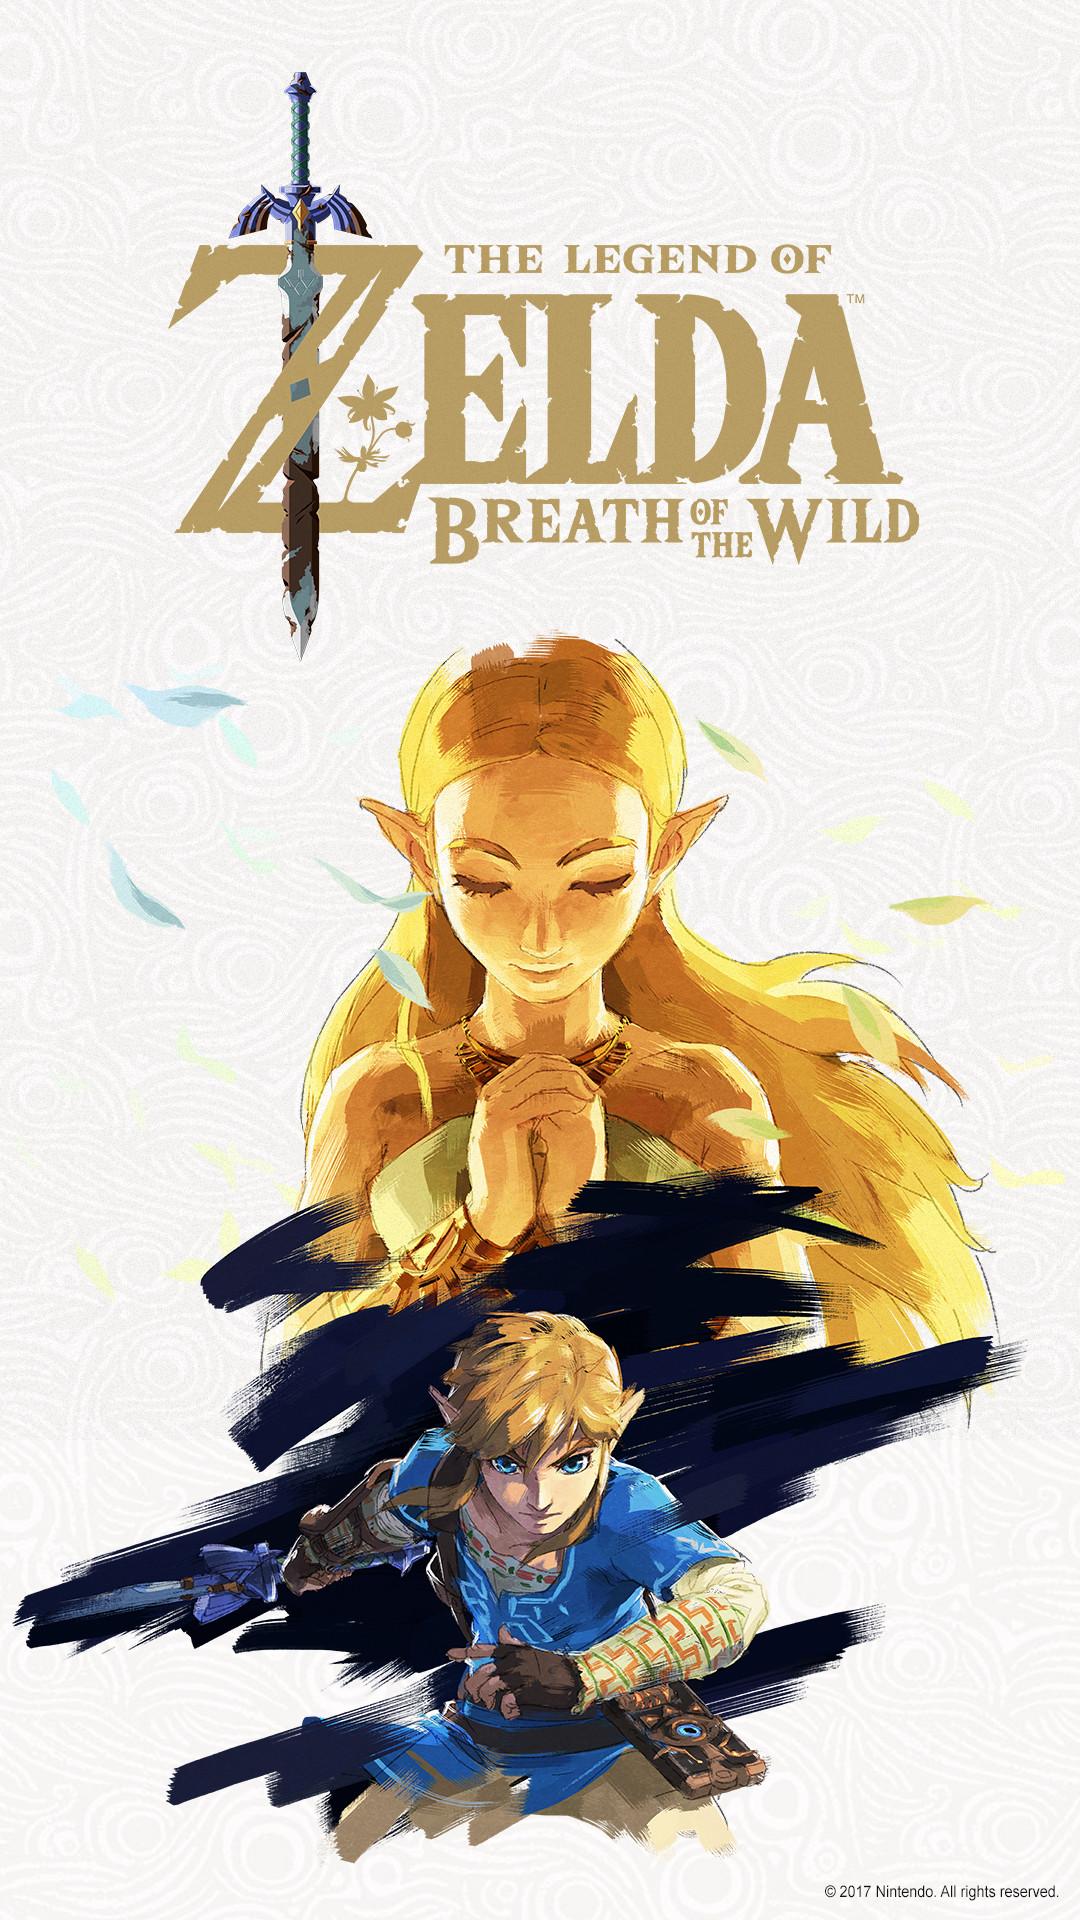 The Legend of Zelda™: Breath of the Wild for the Nintendo